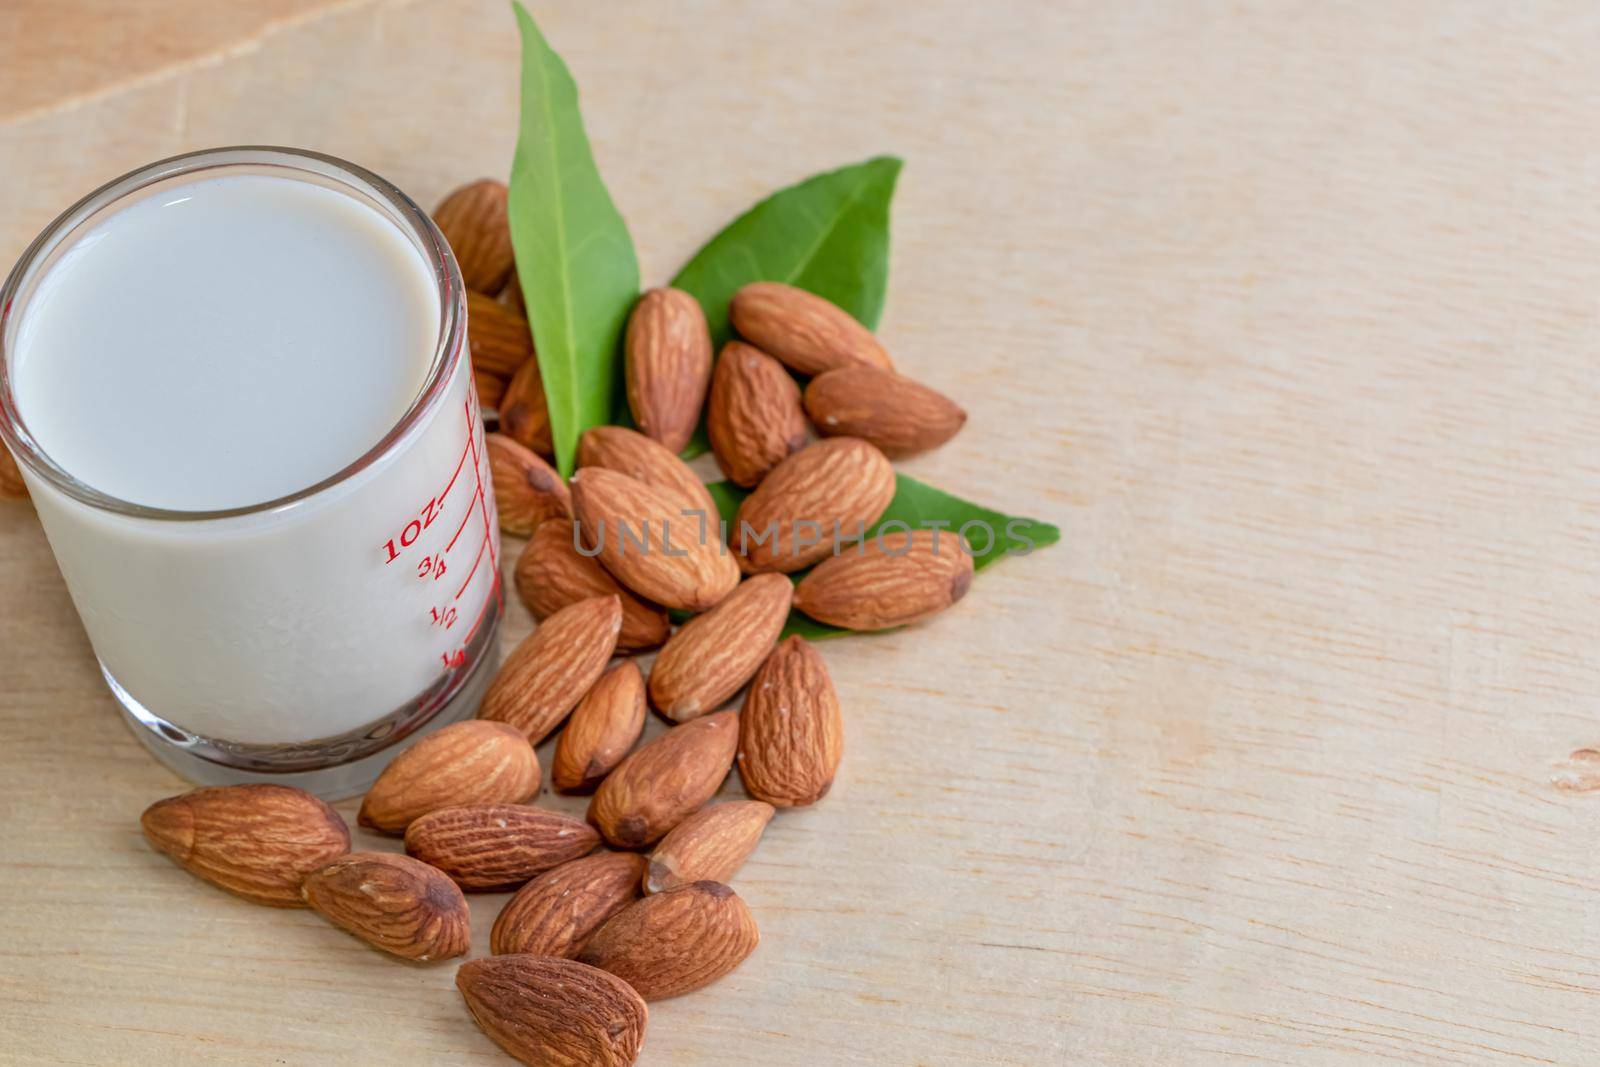 Almonds are useful to help fight free radicals. Strengthens the immune system in the body
Helps to slow down aging and wrinkles of age well